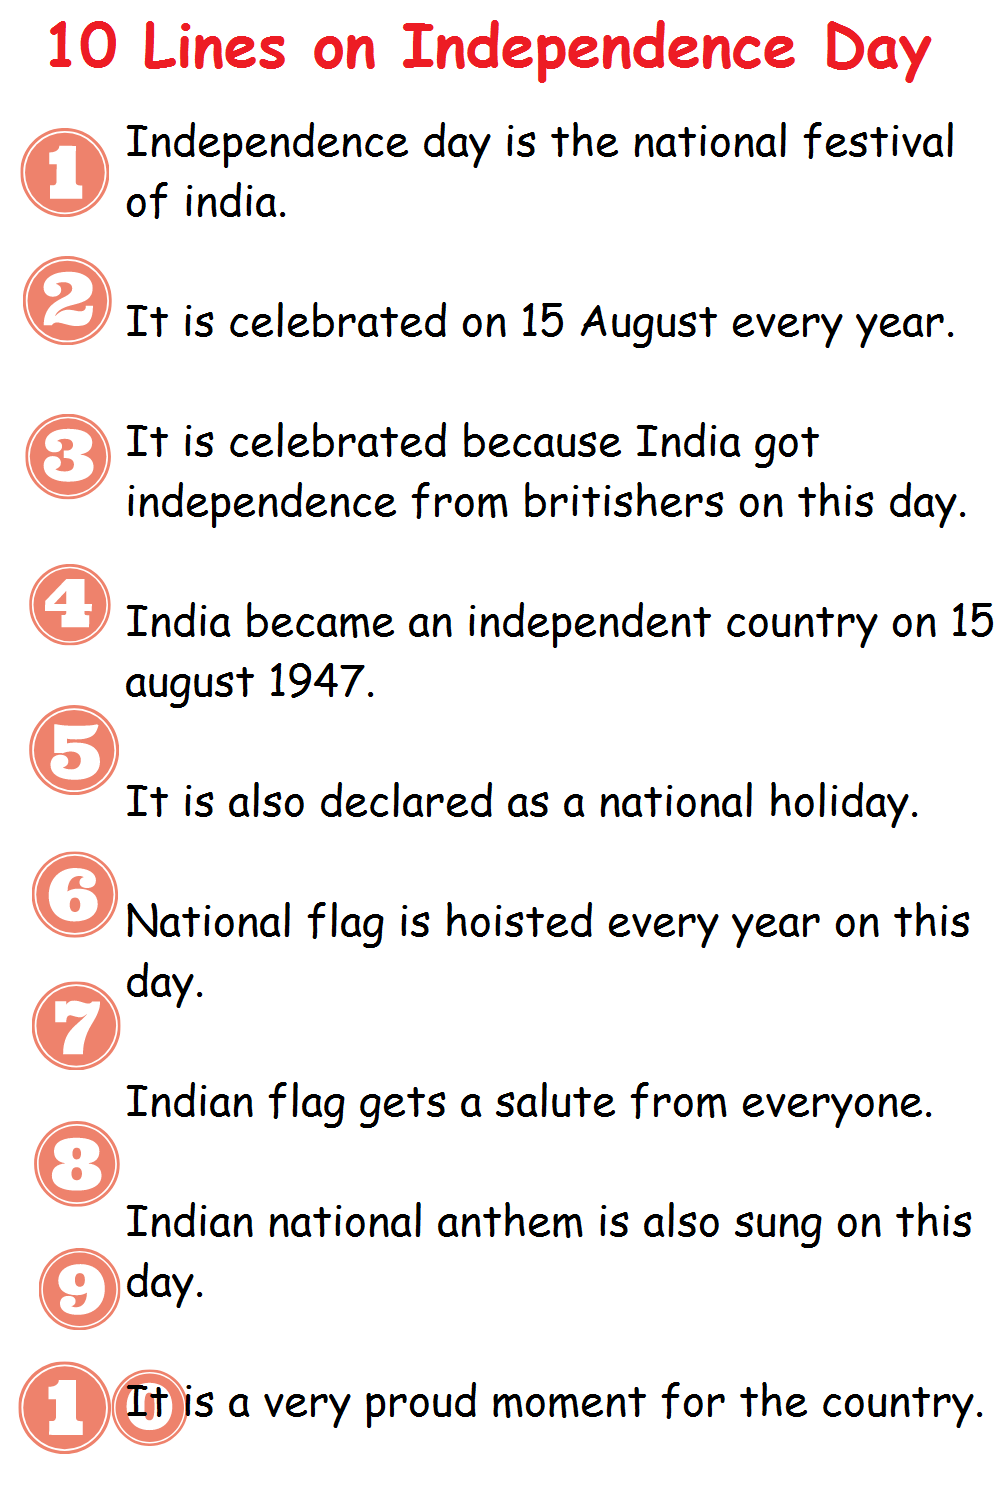 essay on independence day for kids india